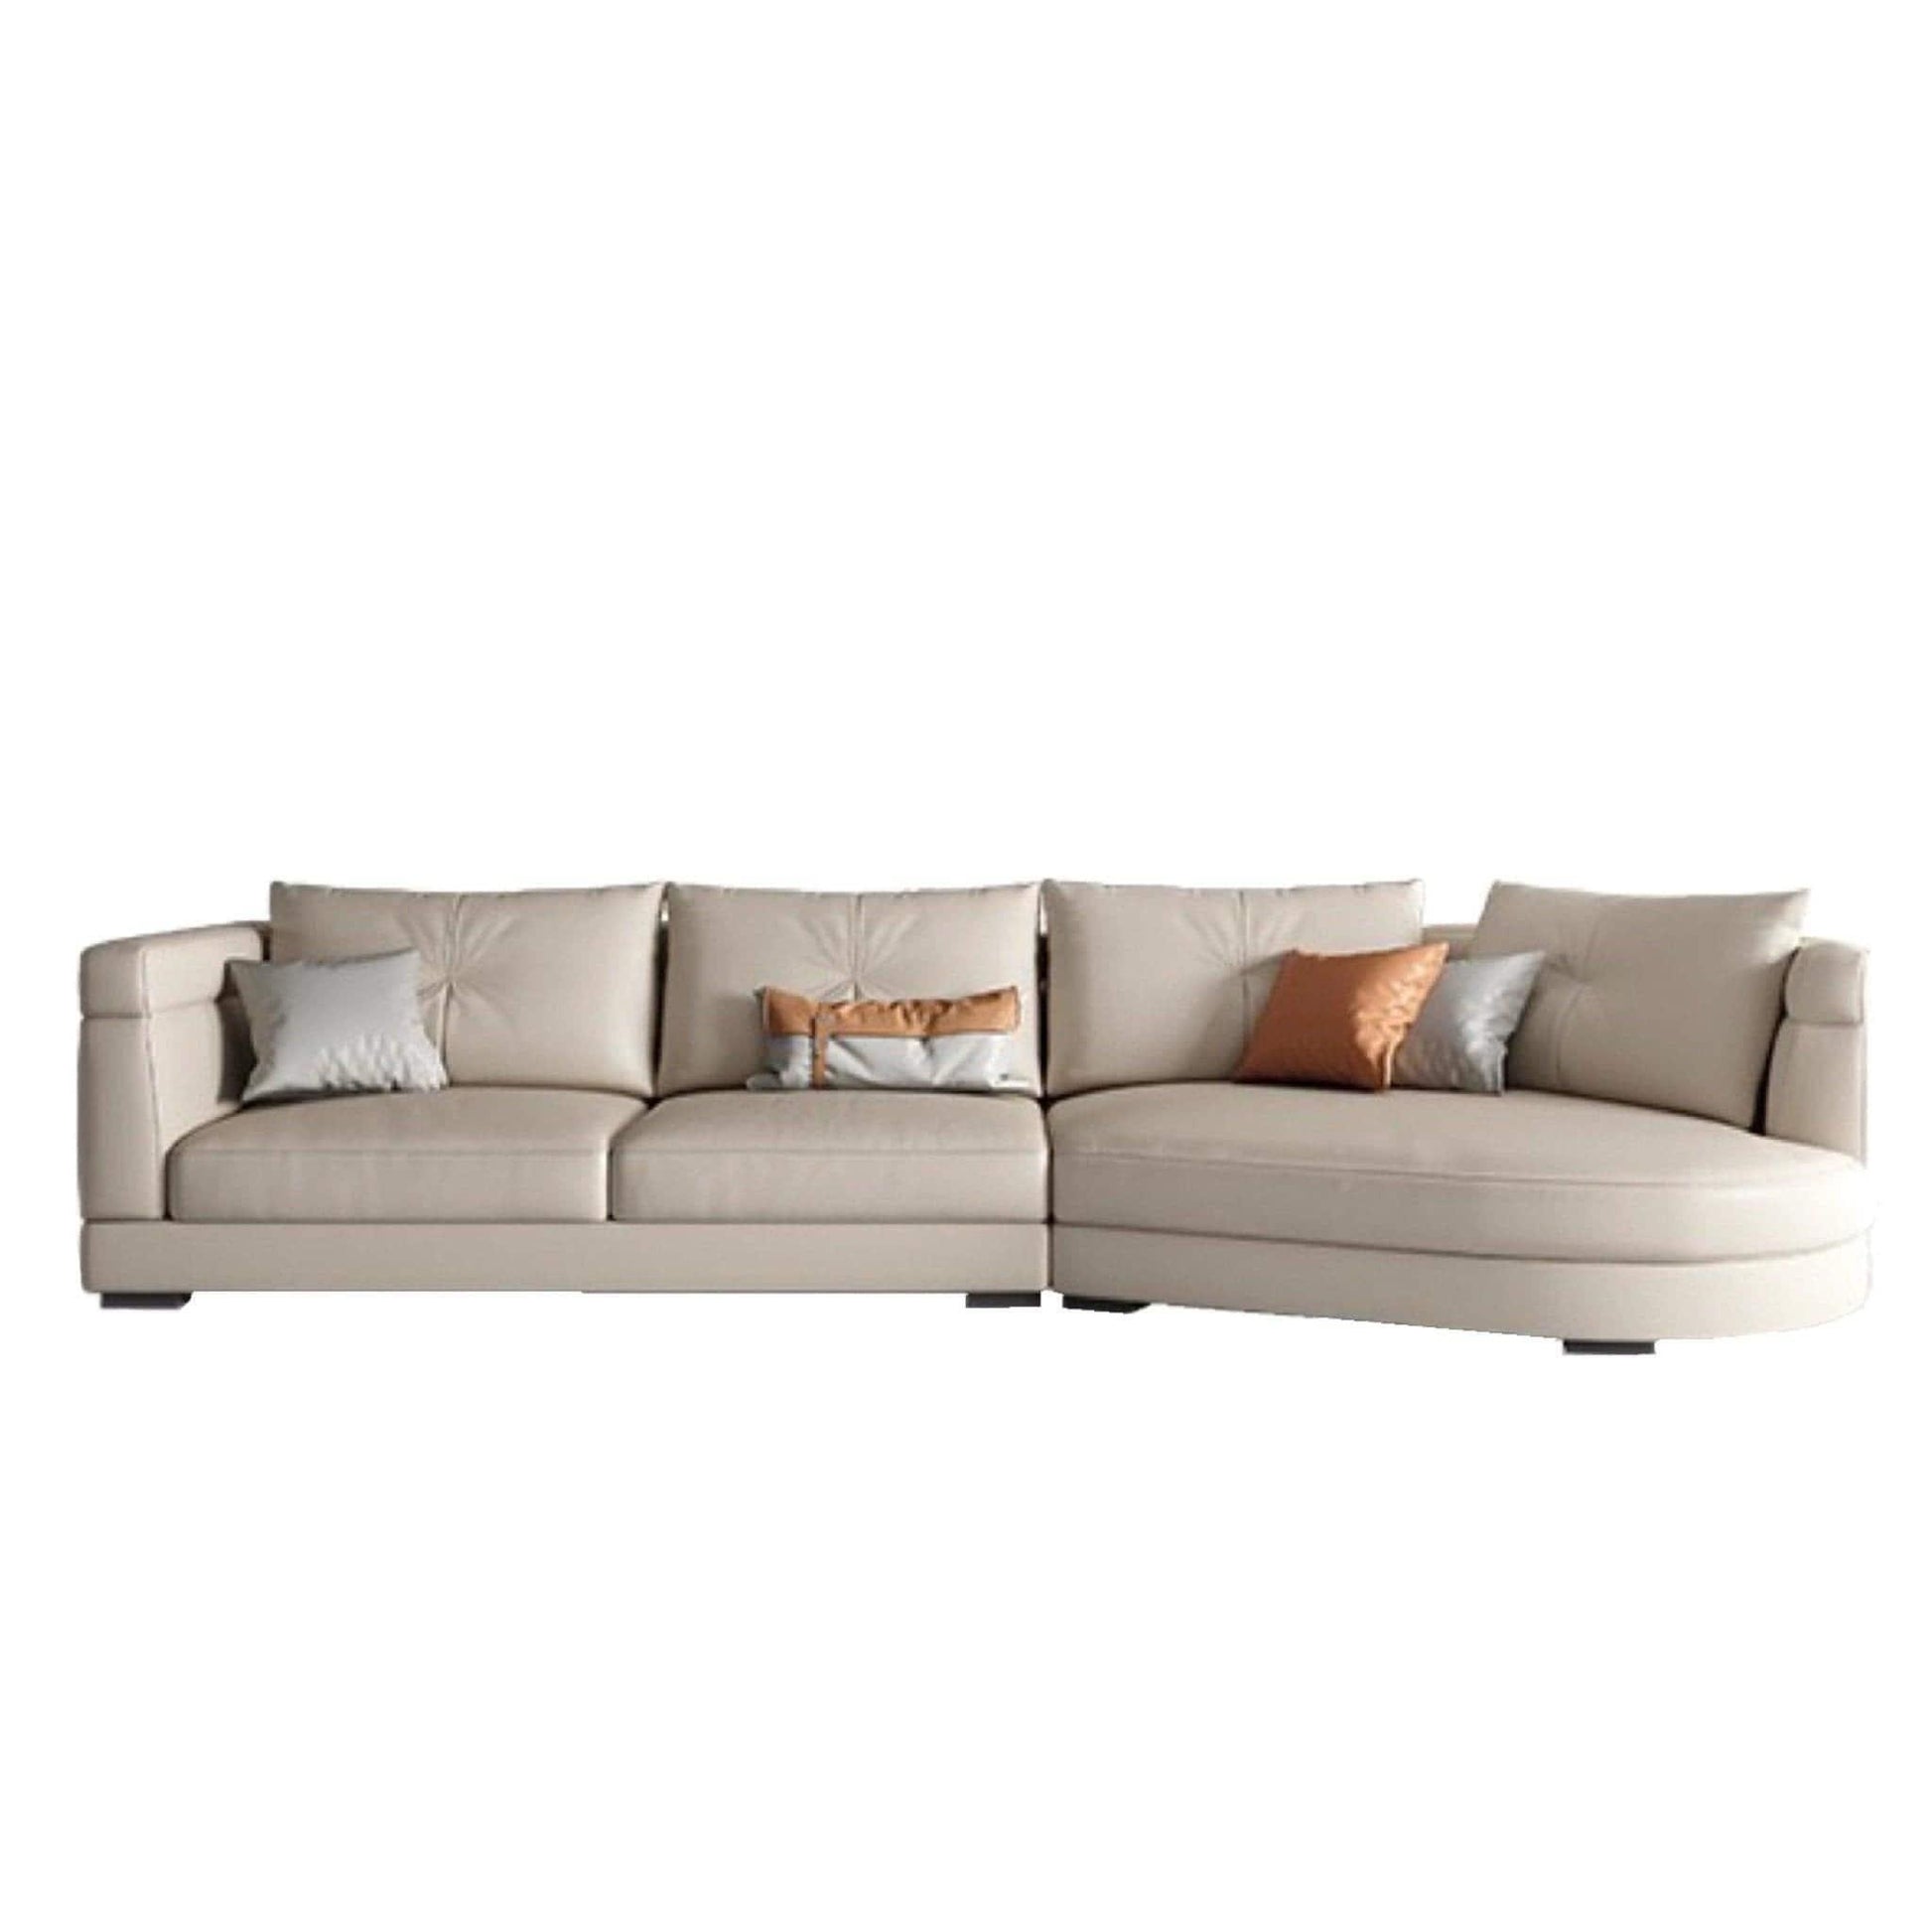 home-atelier-f31a Baxter Designer Sectional Round Chaise Sofa